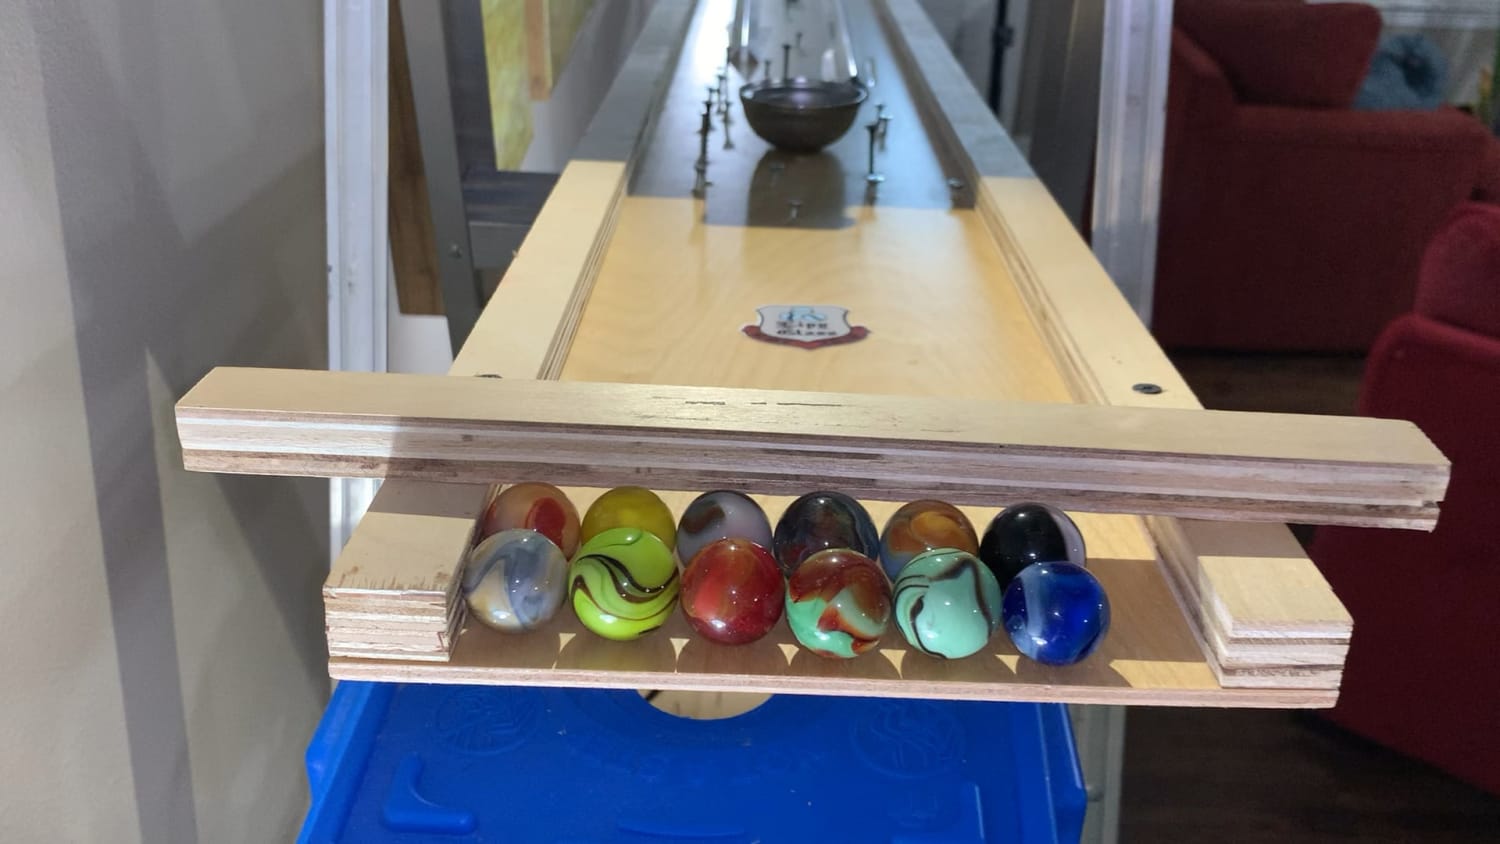 In my free time I enjoy building Marble Tracks and racing marbles to see which one is the fastest. I make a new track each month and create a Tournament for 12 Marbles. Choose your Marble and have some fun. The Full Race will be linked below. If you get beat by the pink ball your ELIMINATED. ..